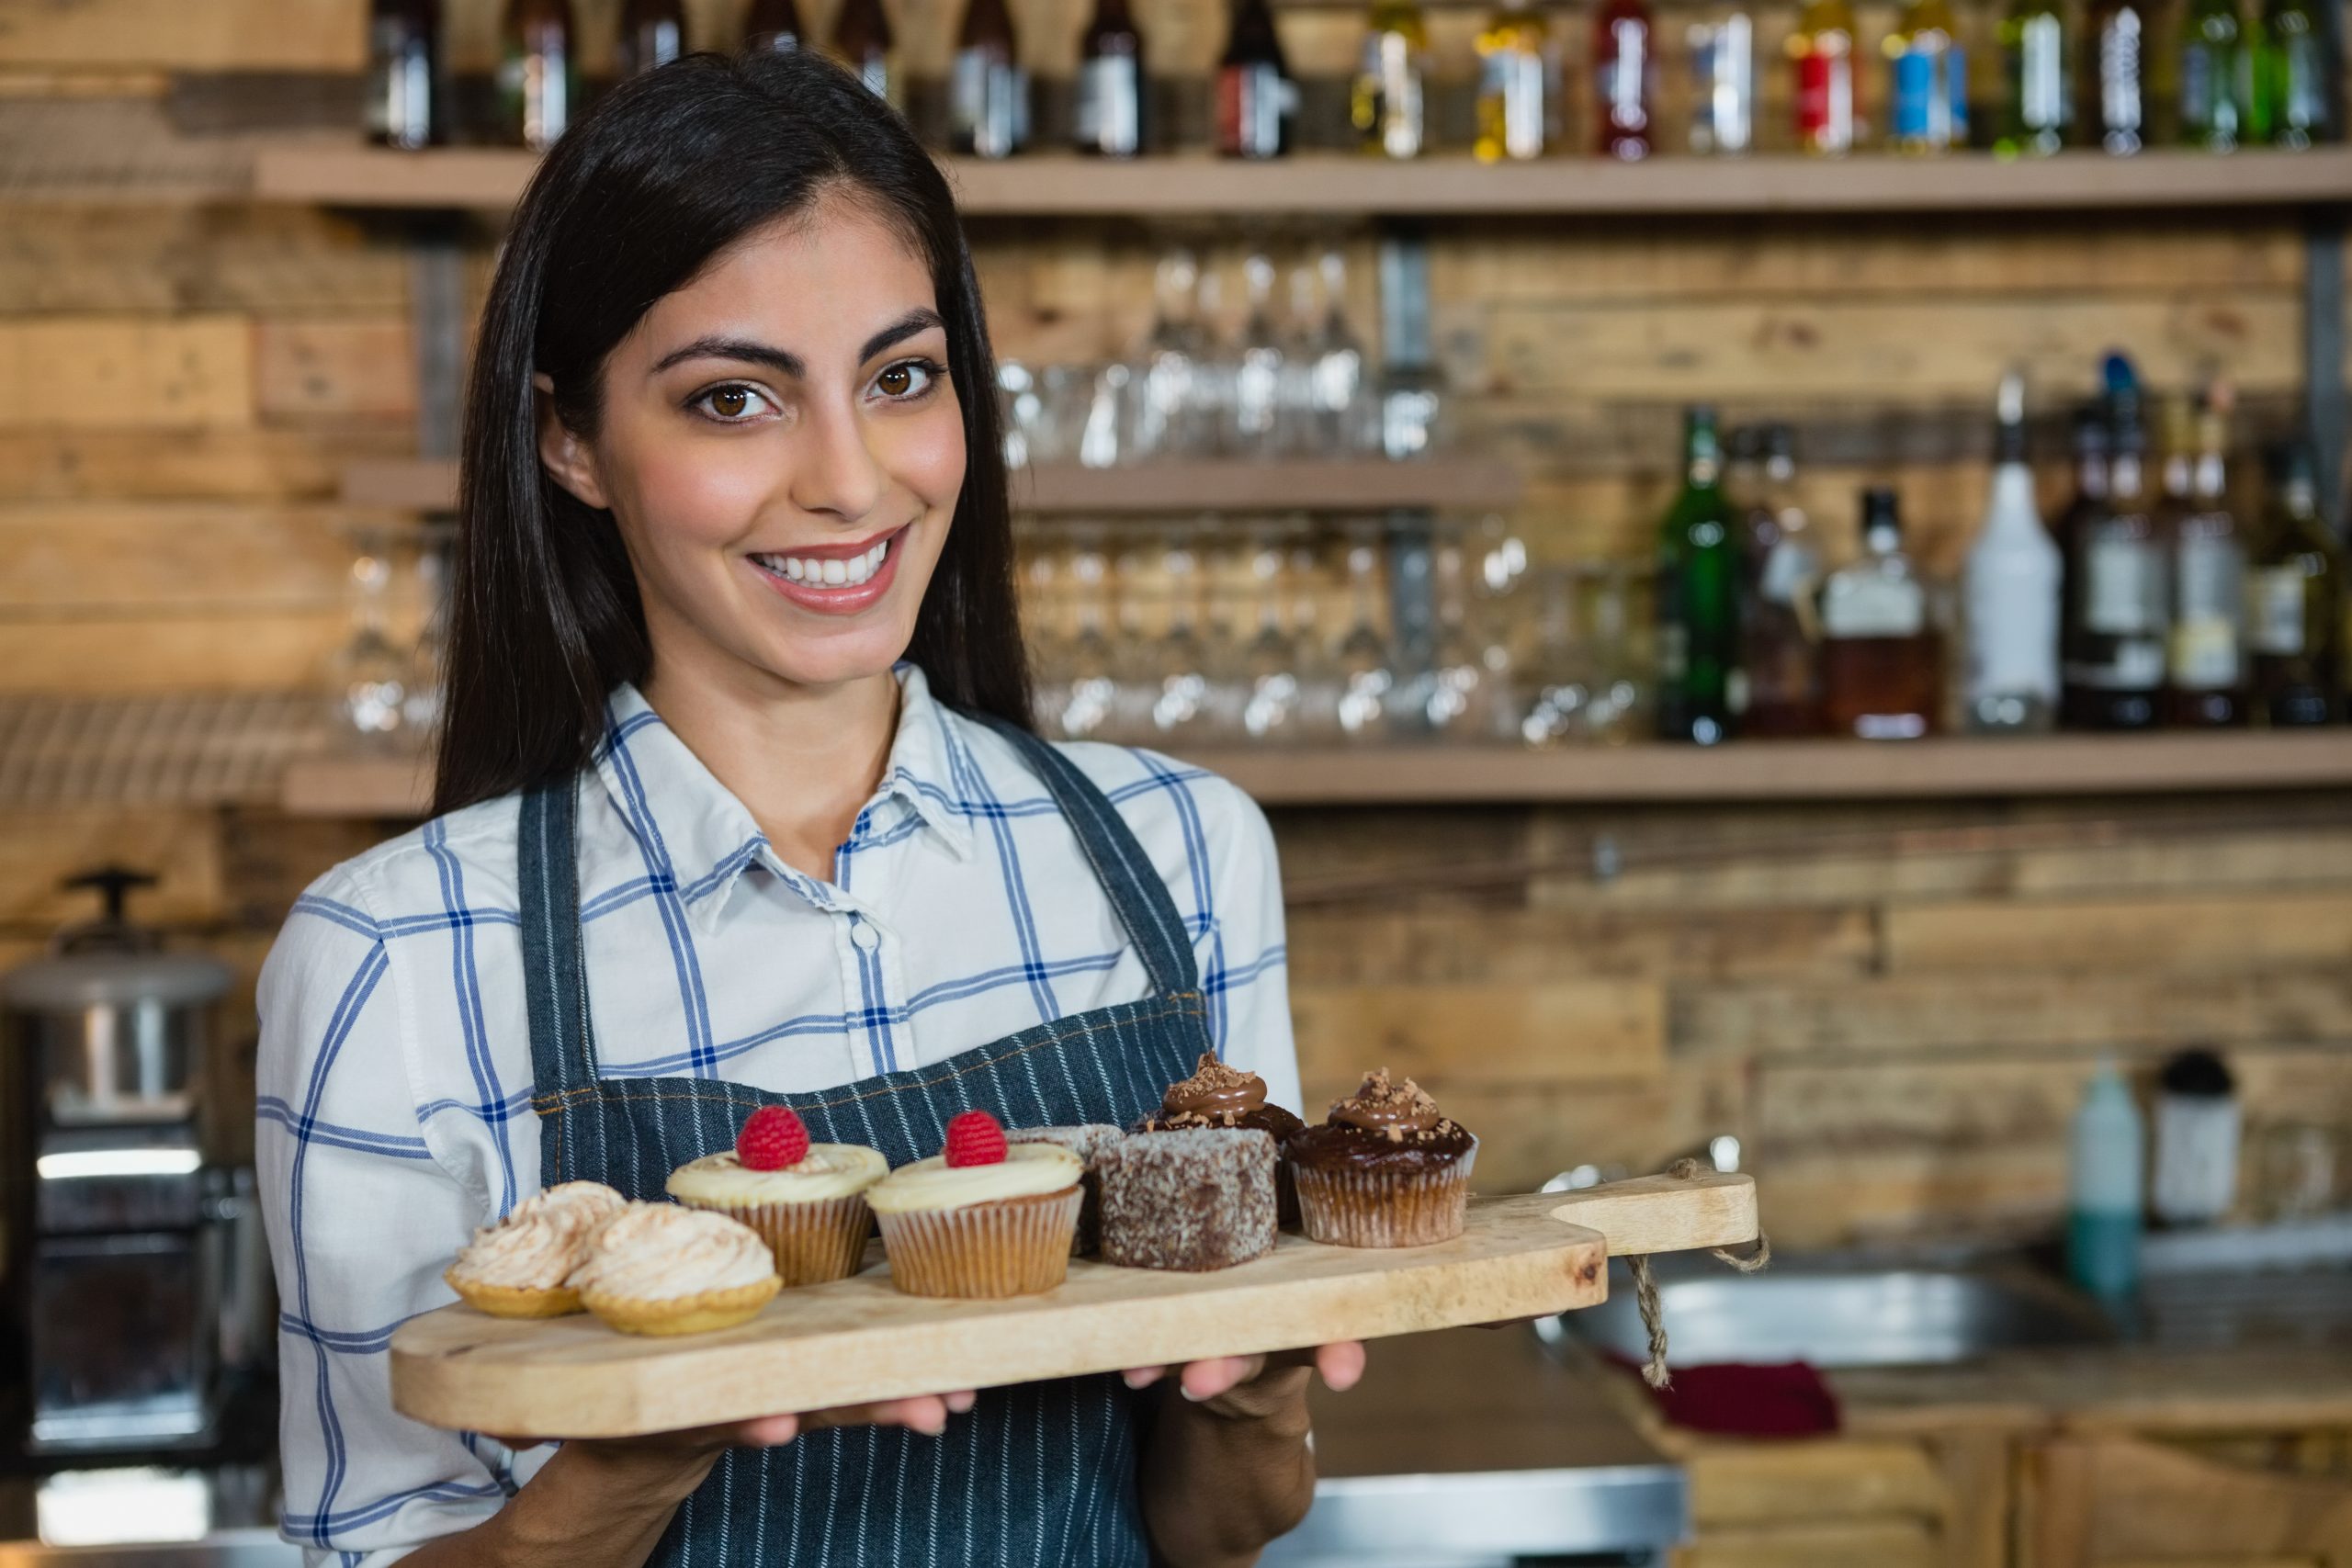 Portrait of smiling waitress holding cupcakes in wooden tray at counter in cafÃ©